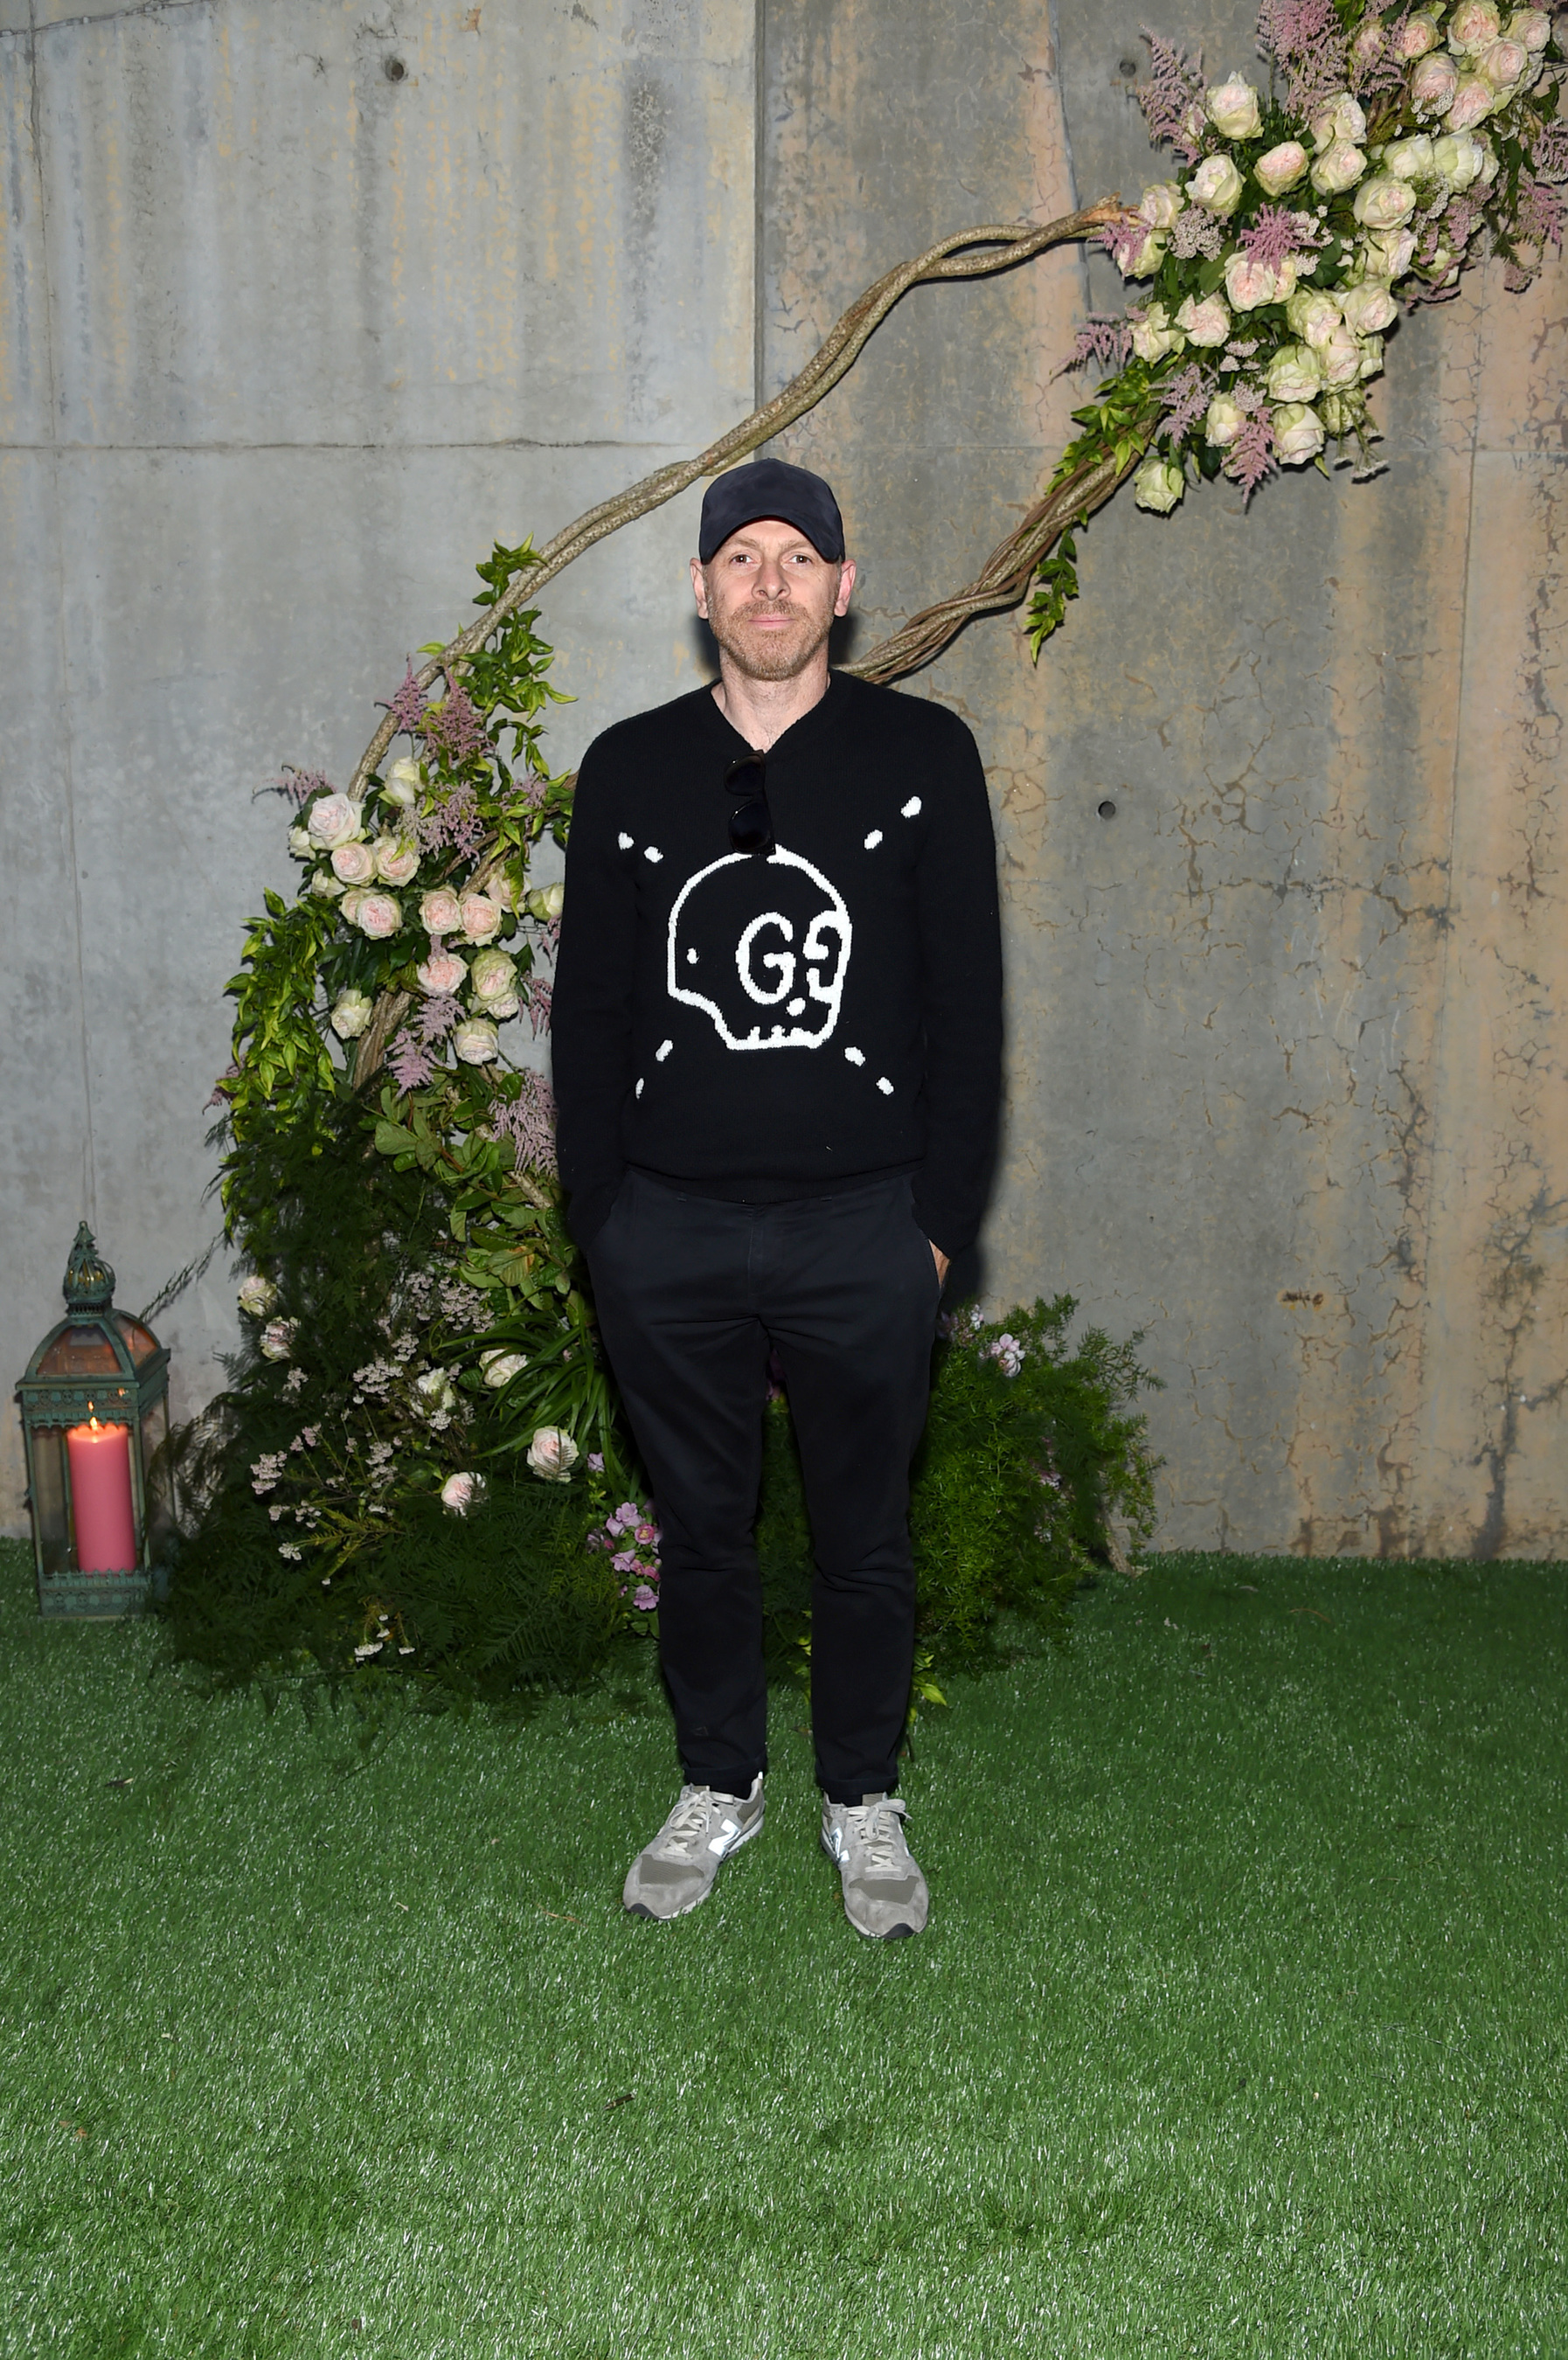 NEW YORK, NY - MAY 02: Glen Luchford attends the Gucci Bloom Fragrance Launch at MoMA PS.1 on May 2, 2017 in New York City. (Photo by Jamie McCarthy/Getty Images for Gucci)